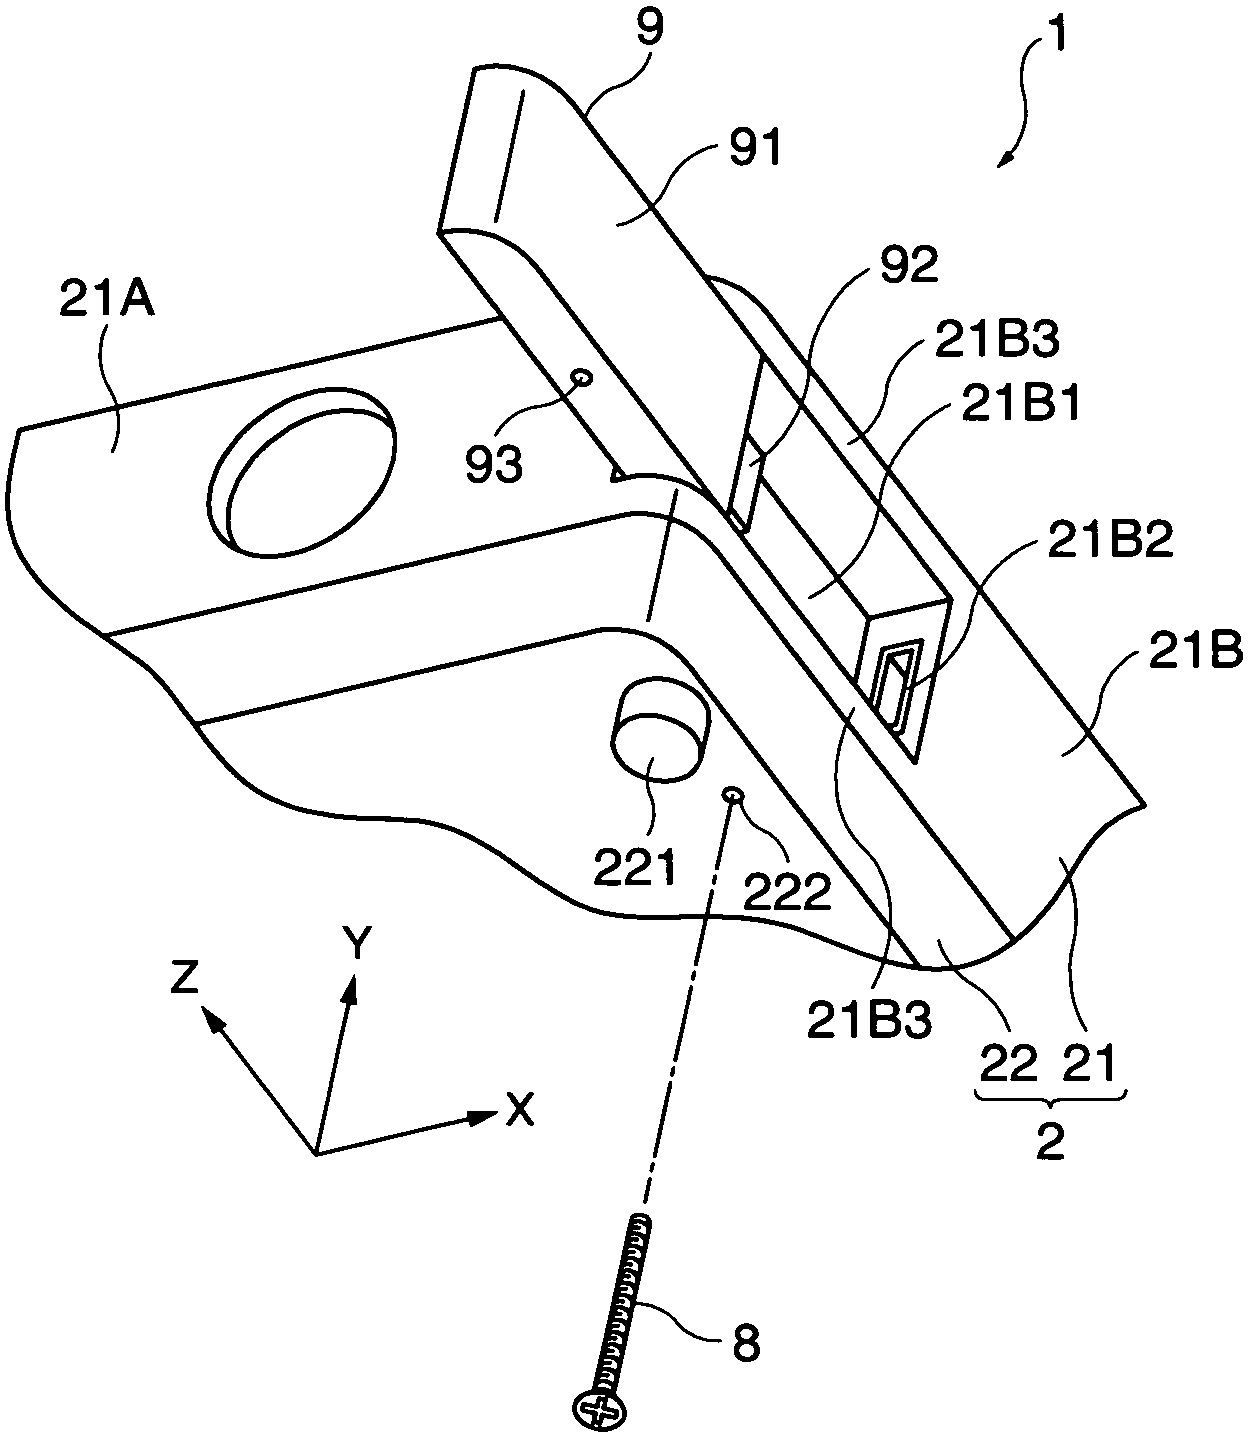 Electronic instrument and USB device